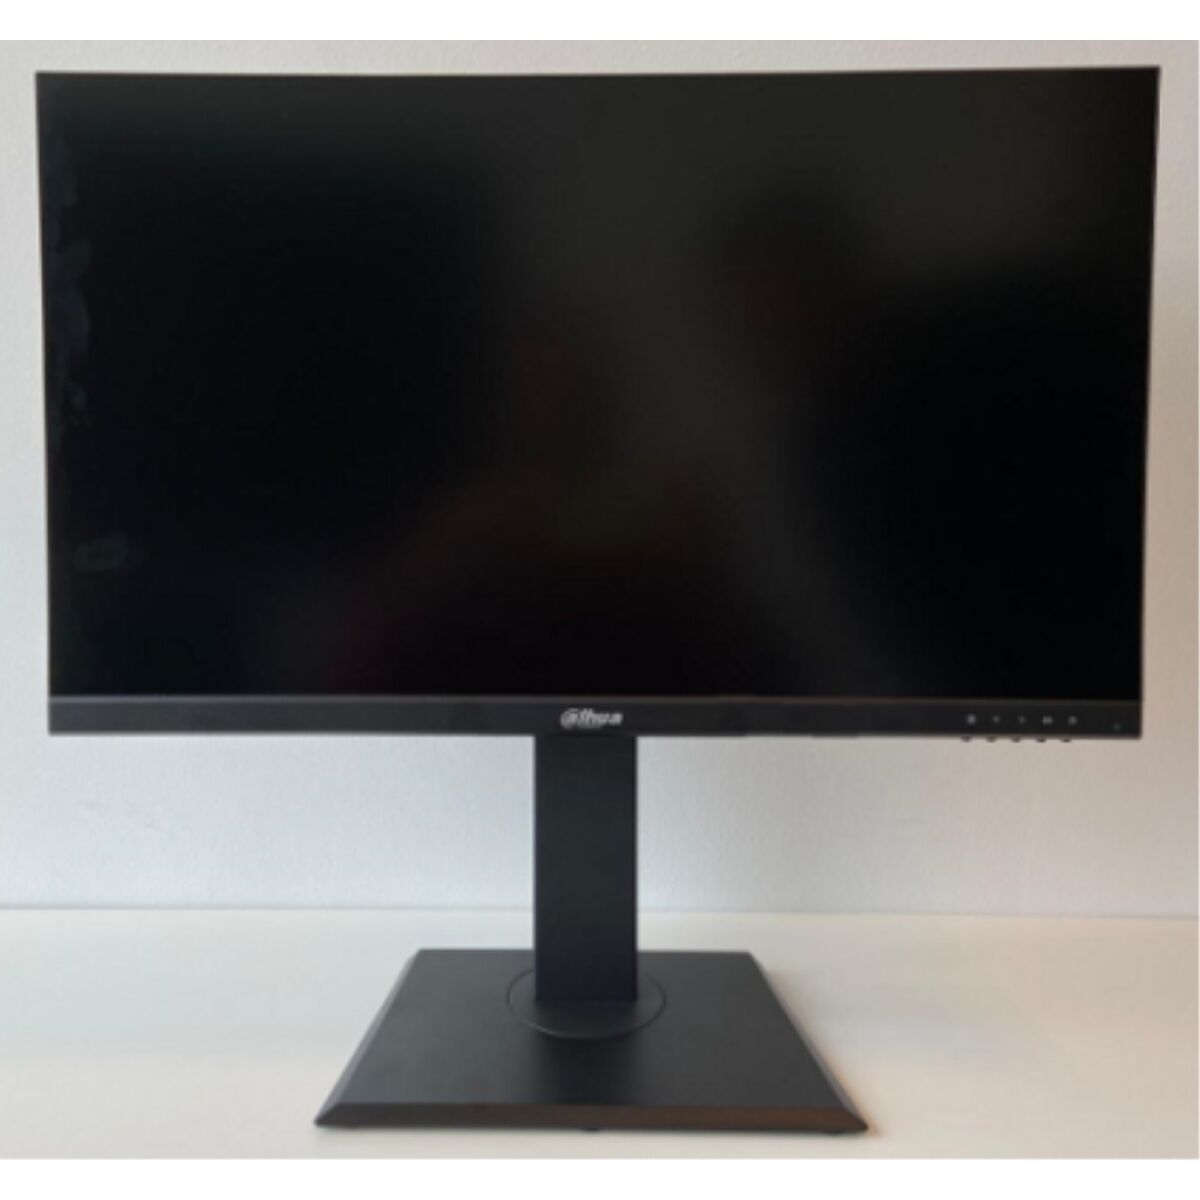 Monitor DAHUA TECHNOLOGY, DAHUA TECHNOLOGY, Computing, monitor-dahua-technology-8, Brand_DAHUA TECHNOLOGY, category-reference-2609, category-reference-2642, category-reference-2644, category-reference-t-19685, category-reference-t-19902, computers / peripherals, Condition_NEW, office, Price_100 - 200, Teleworking, RiotNook